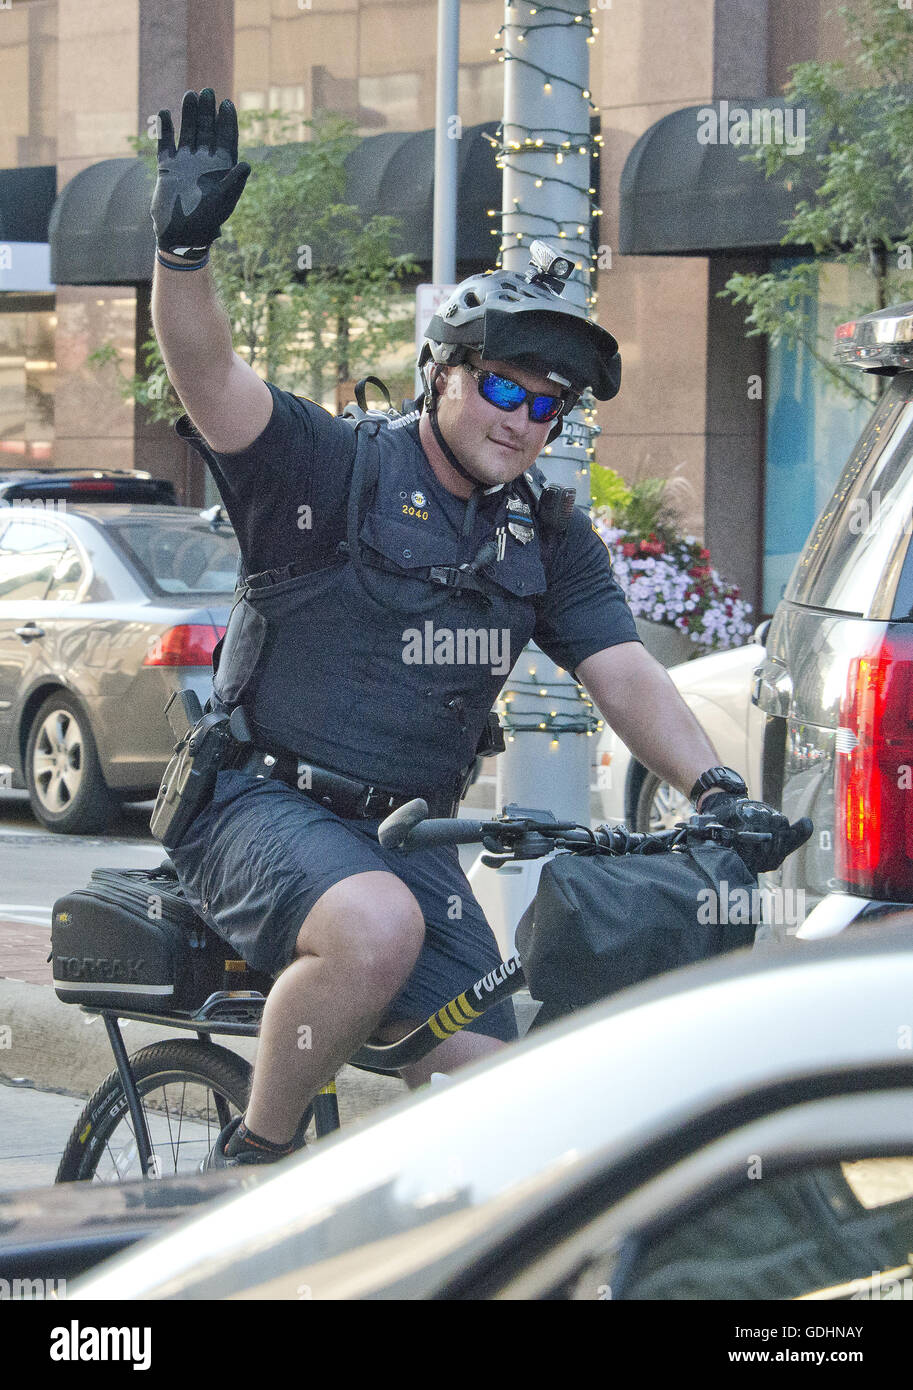 Cleveland, Ohio, USA. 16th July, 2016. A police officer on a bicycle acknowledges the applause of bystanders as he and his colleagues ride down Euclid Avenue about two blocks from the Quicken Loans Arena, site of the 2016 Republican National Convention in Cleveland, Ohio on Saturday, July 16, 2016.Credit: Ron Sachs/CNP. © Ron Sachs/CNP/ZUMA Wire/Alamy Live News Stock Photo